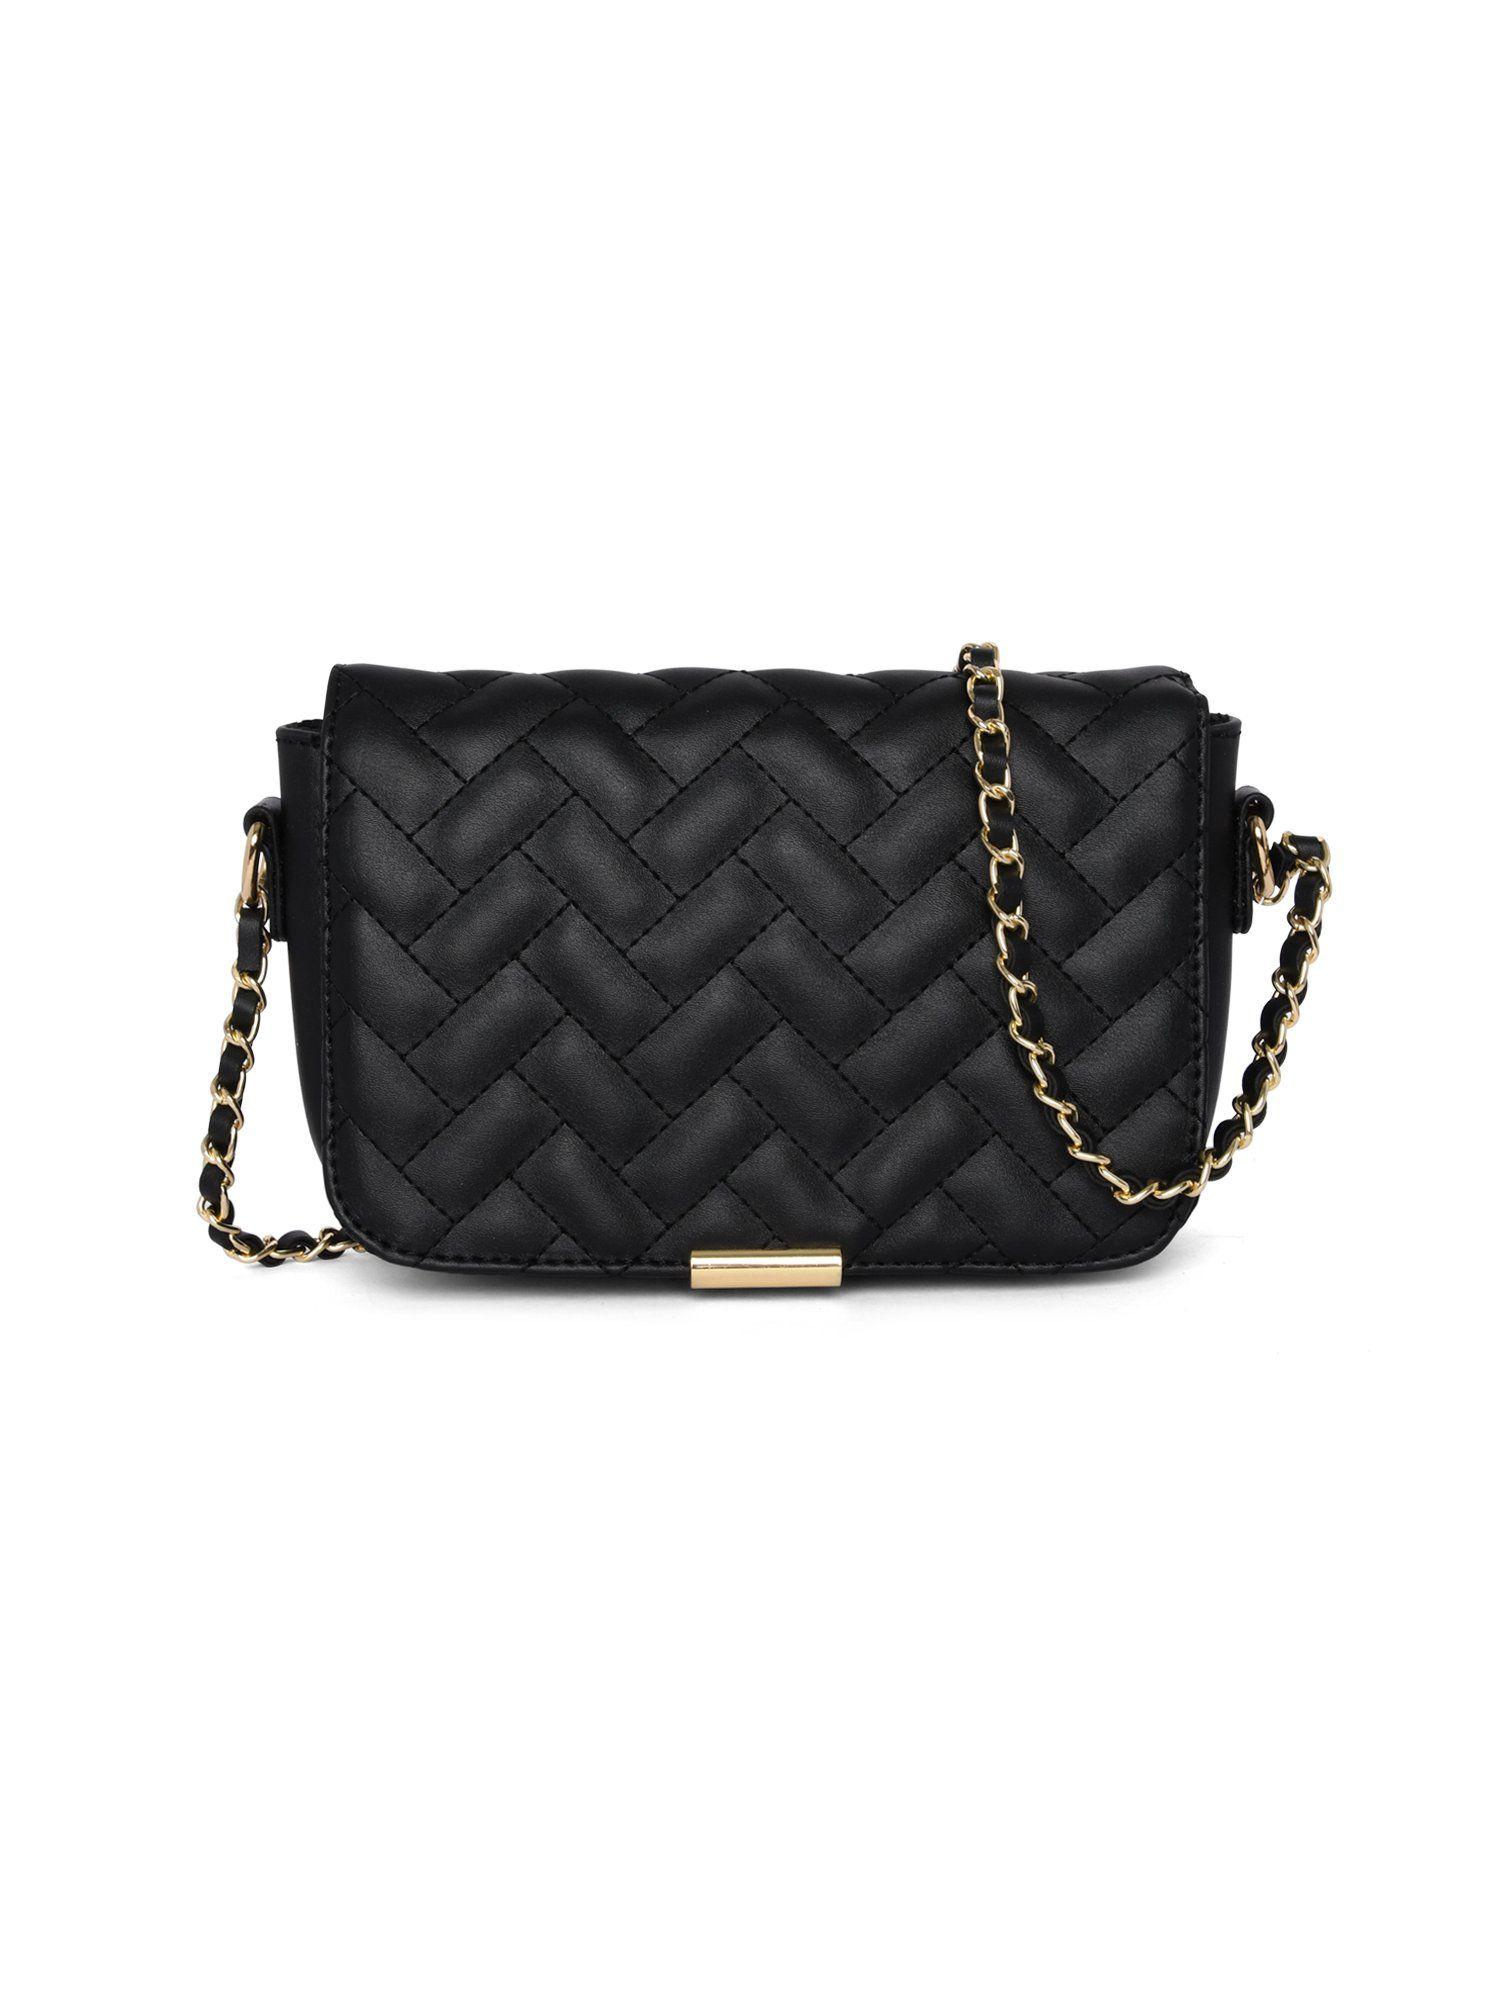 accessorize london women's faux leather black quinn quilted woven chain sling bag